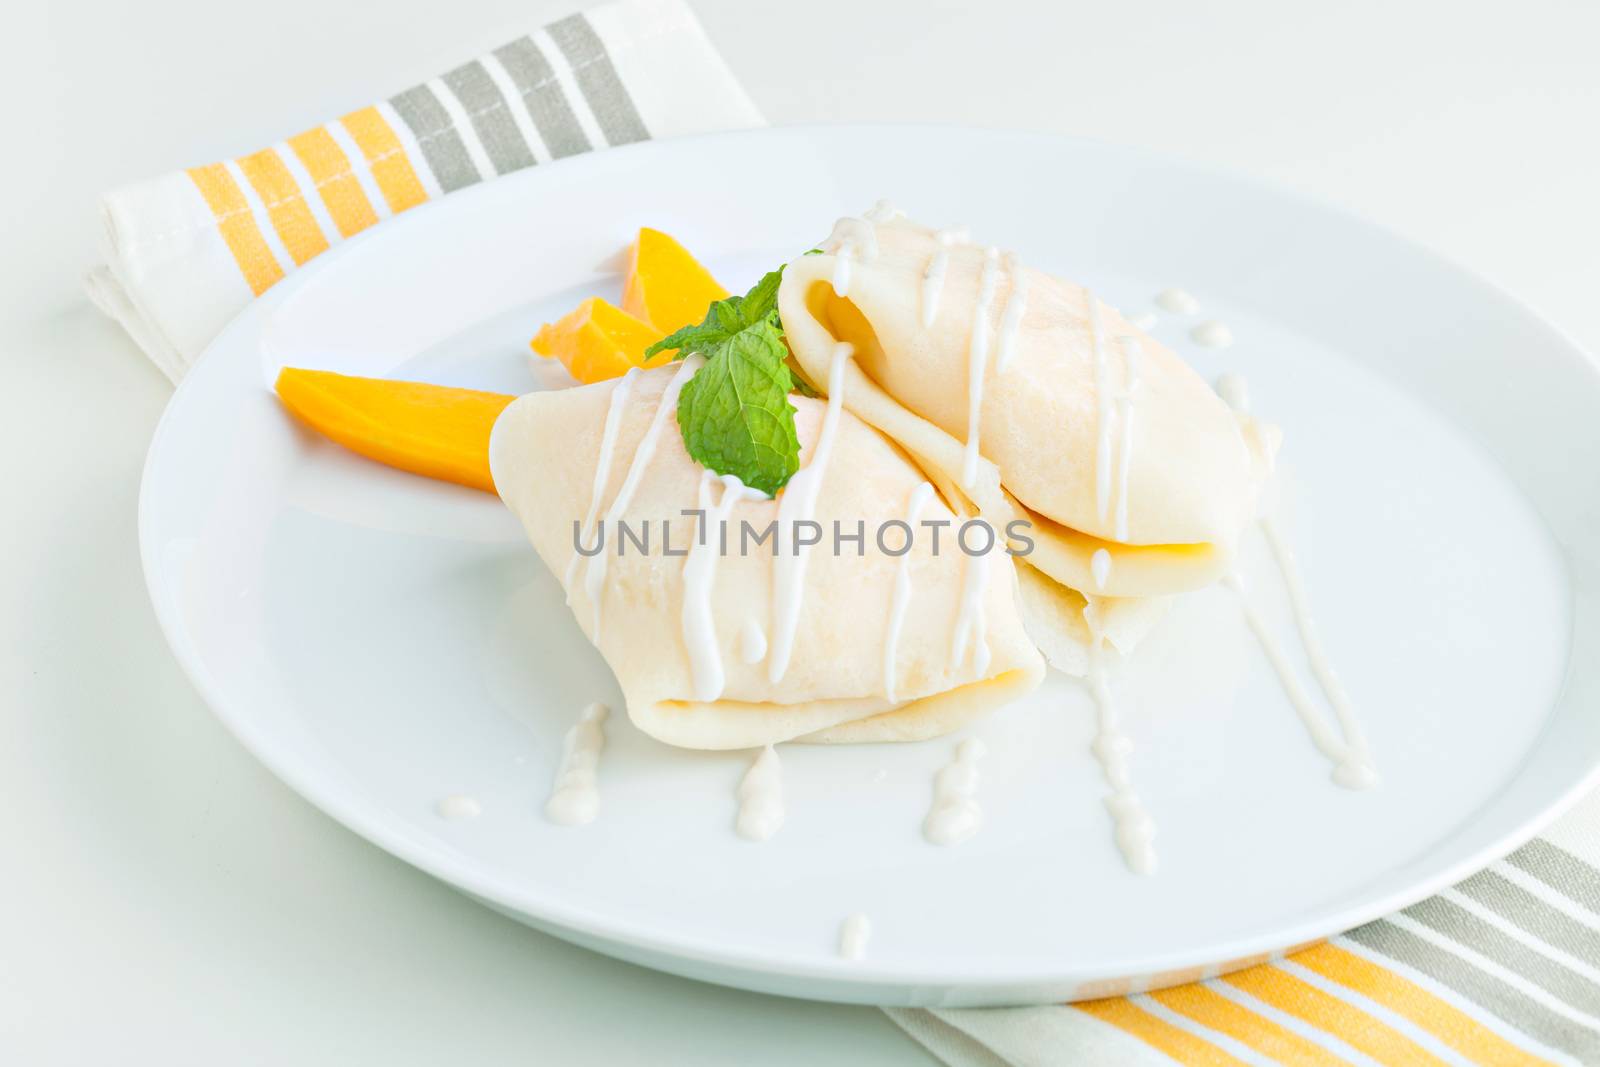 Thai style tropical dessert crepes filled with fresh mango and sticky rice. Shallow depth of field.